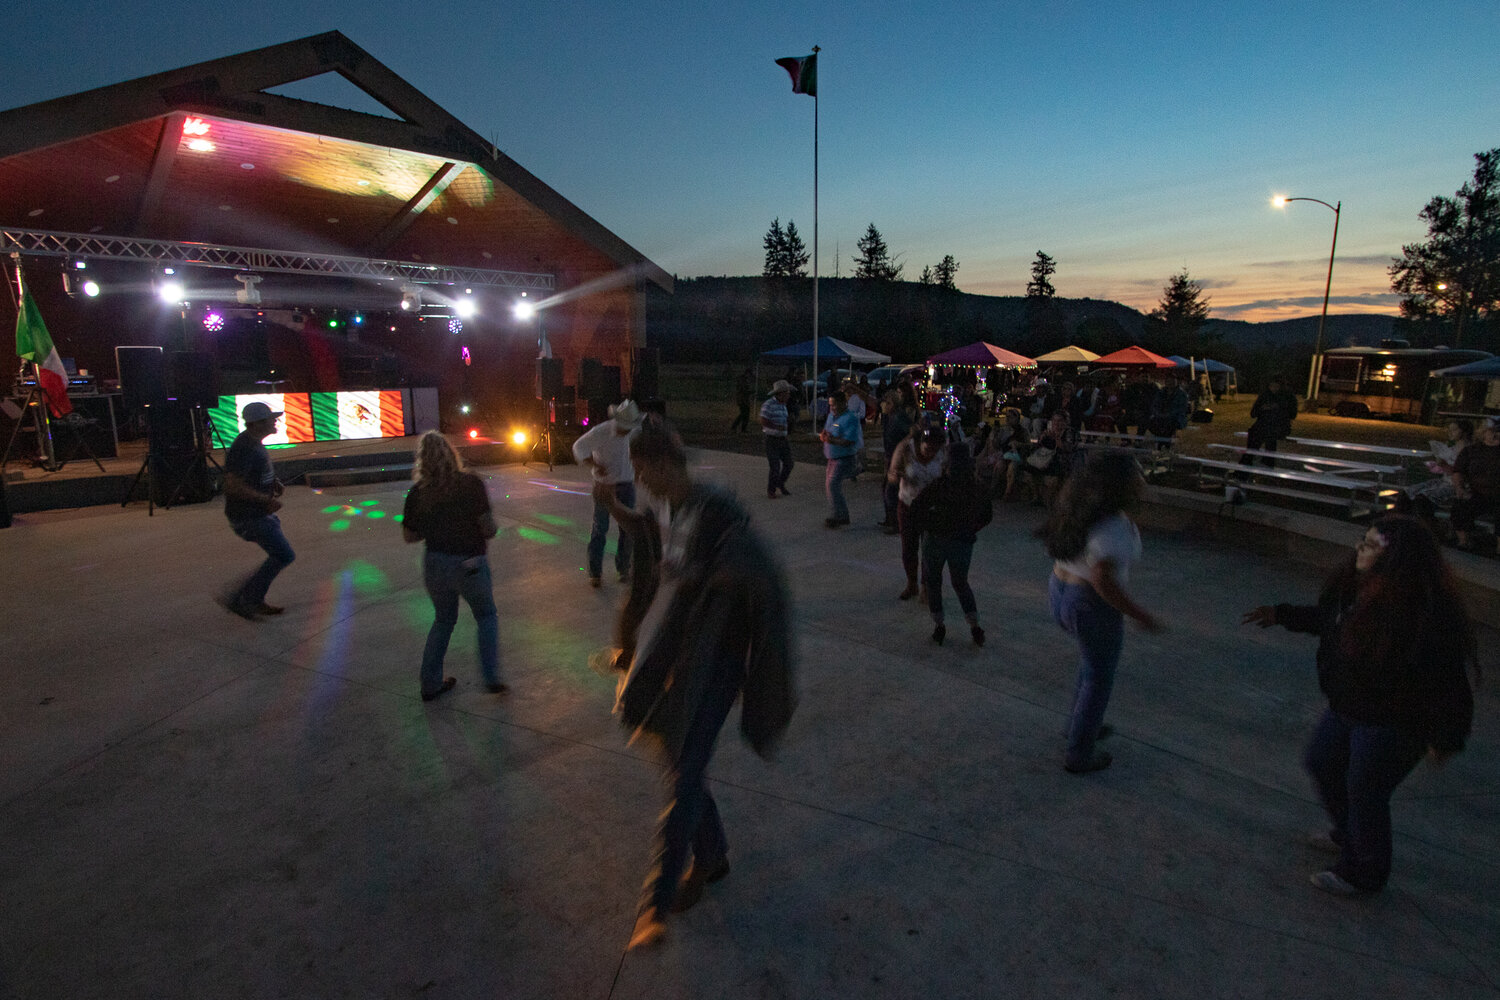 Attendees dance their way into the night to the sounds of DJ Escandalo Zona Orienta at the Mexican Independence Day celebration at Klickitat Prairie Park in Mossyrock on Saturday, Sept. 16.